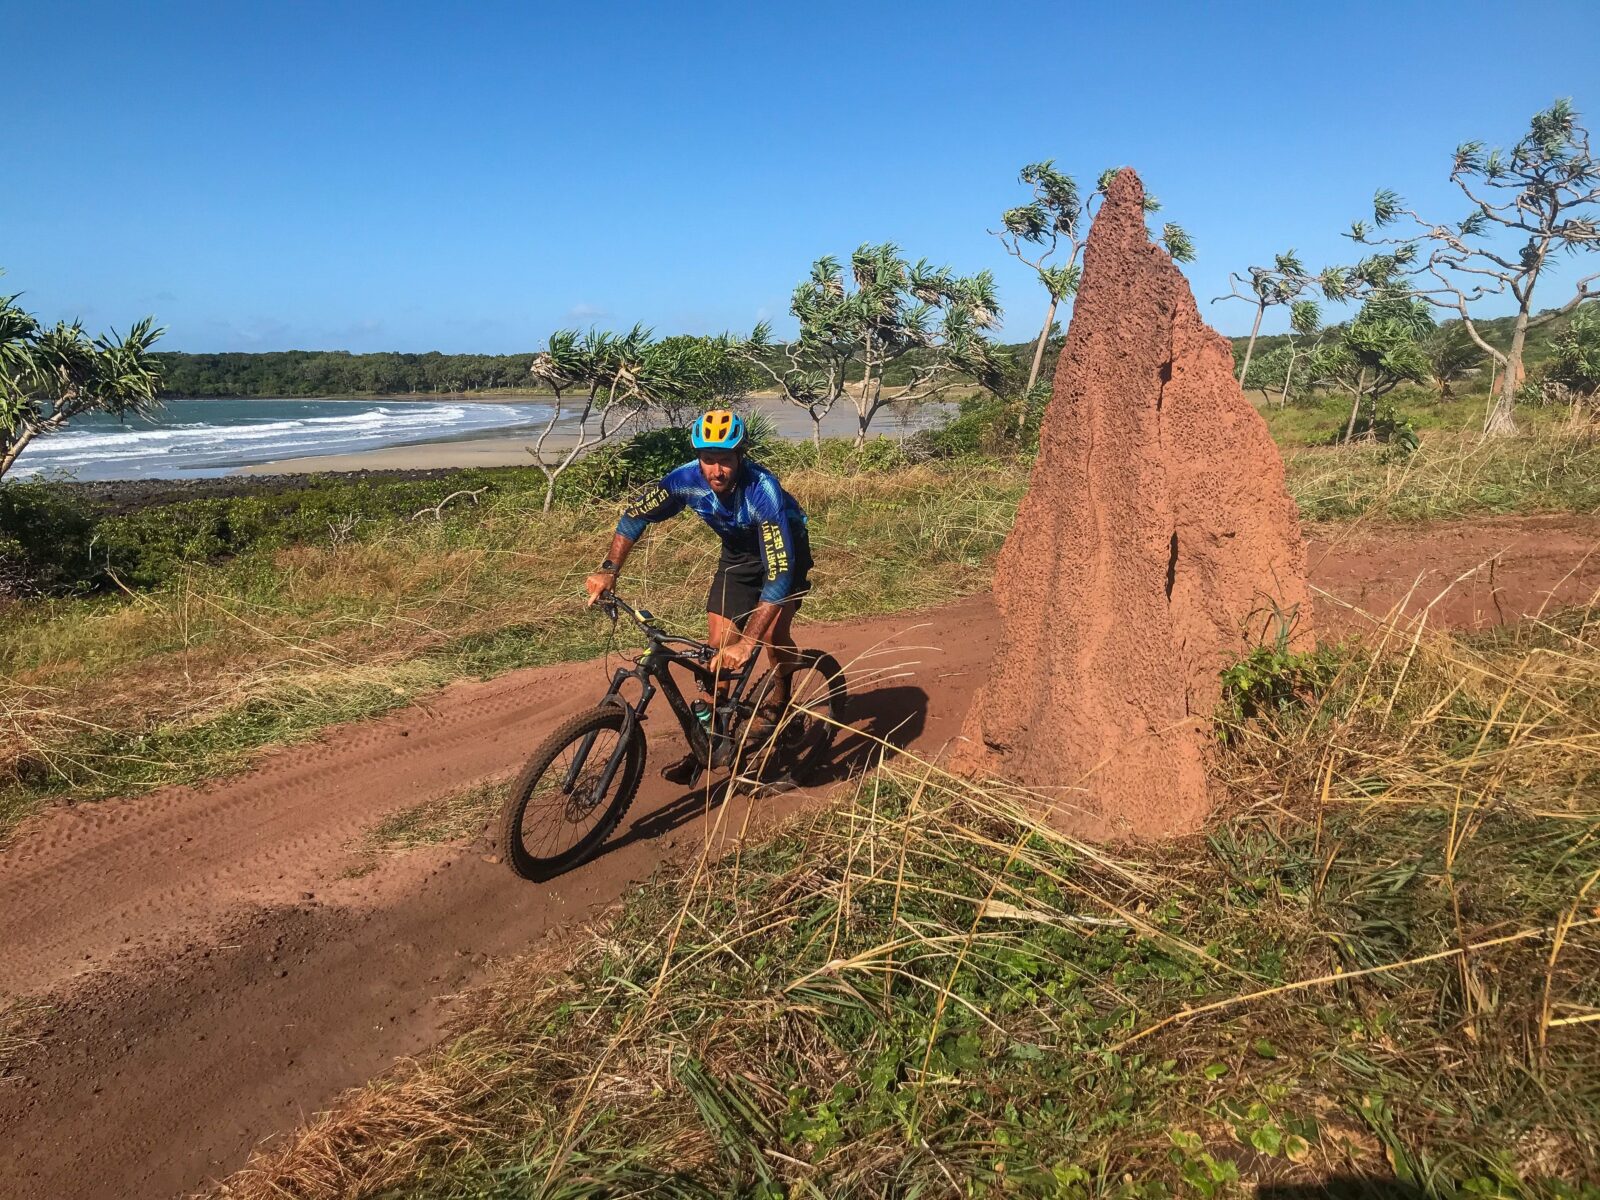 Rider rounding a point on the 5 Beaches track